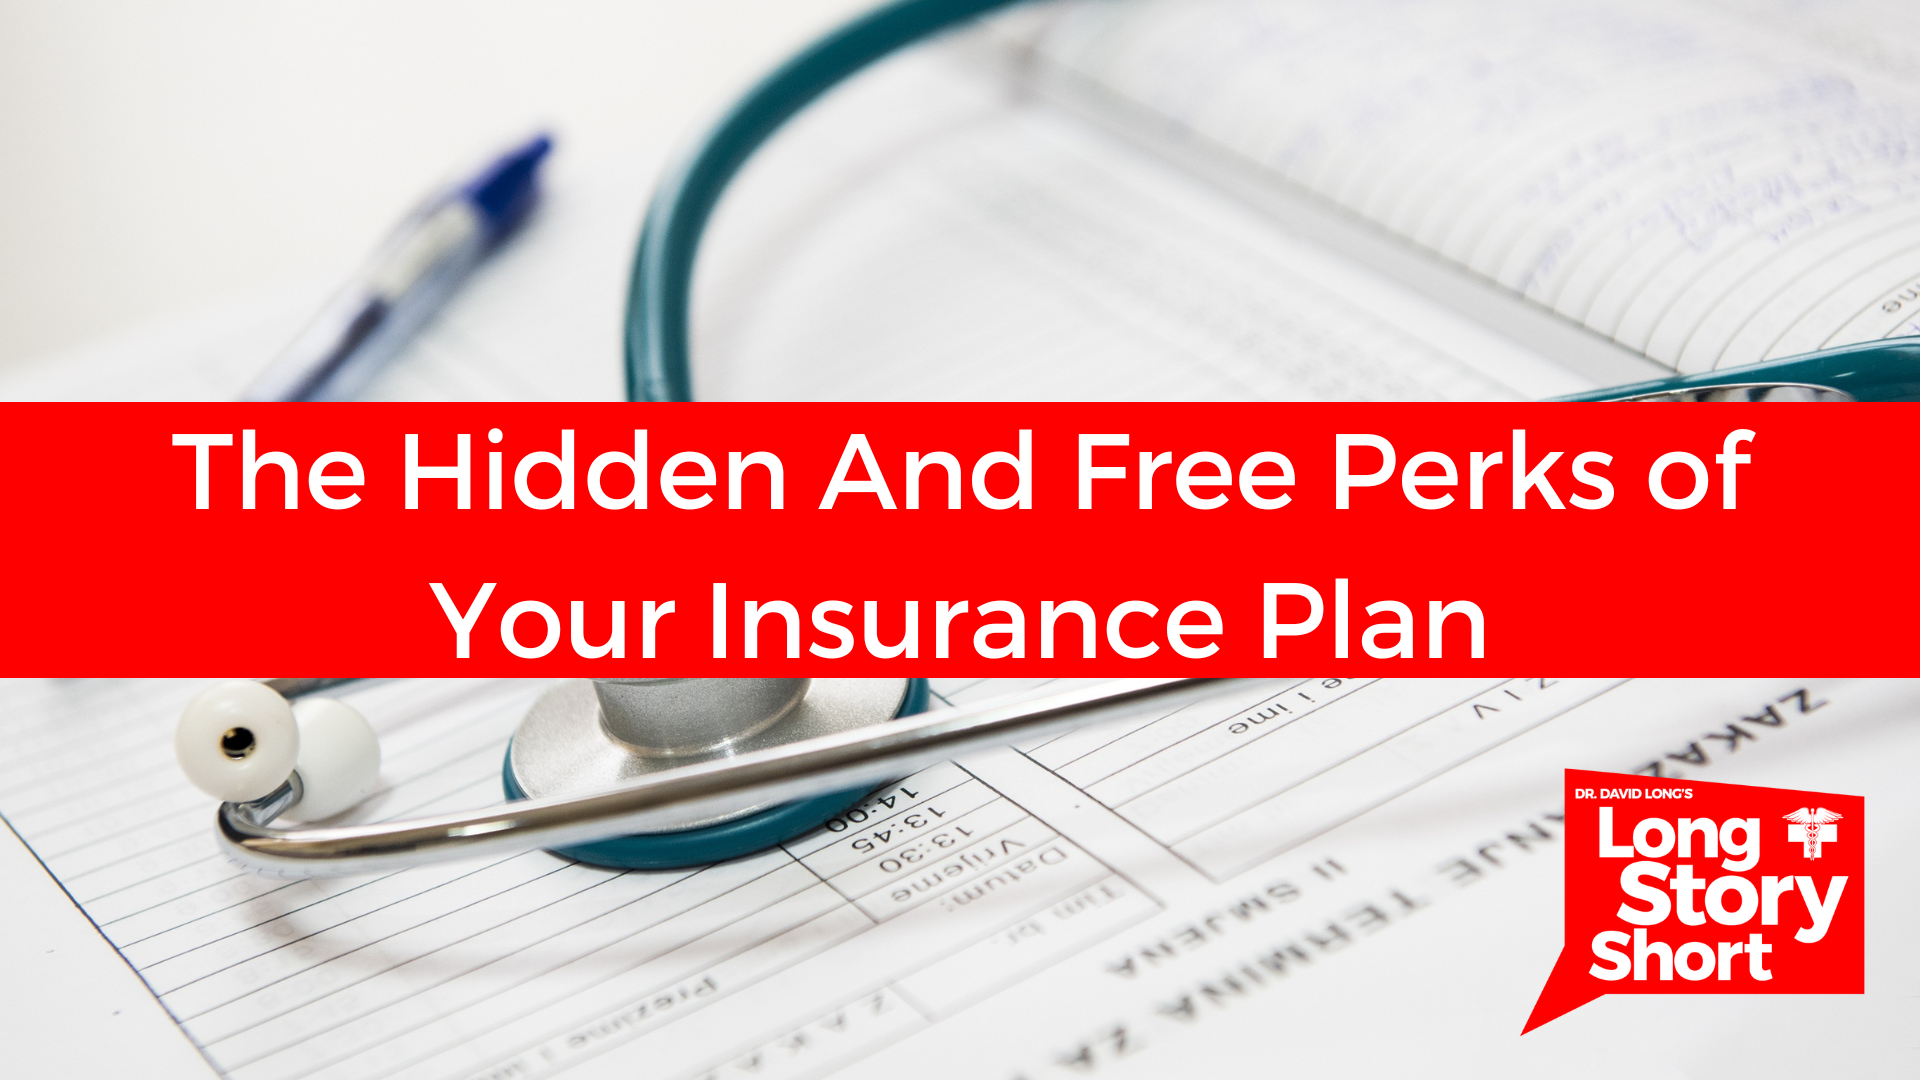 You are currently viewing The Hidden And Free Perks of Your Insurance Plan